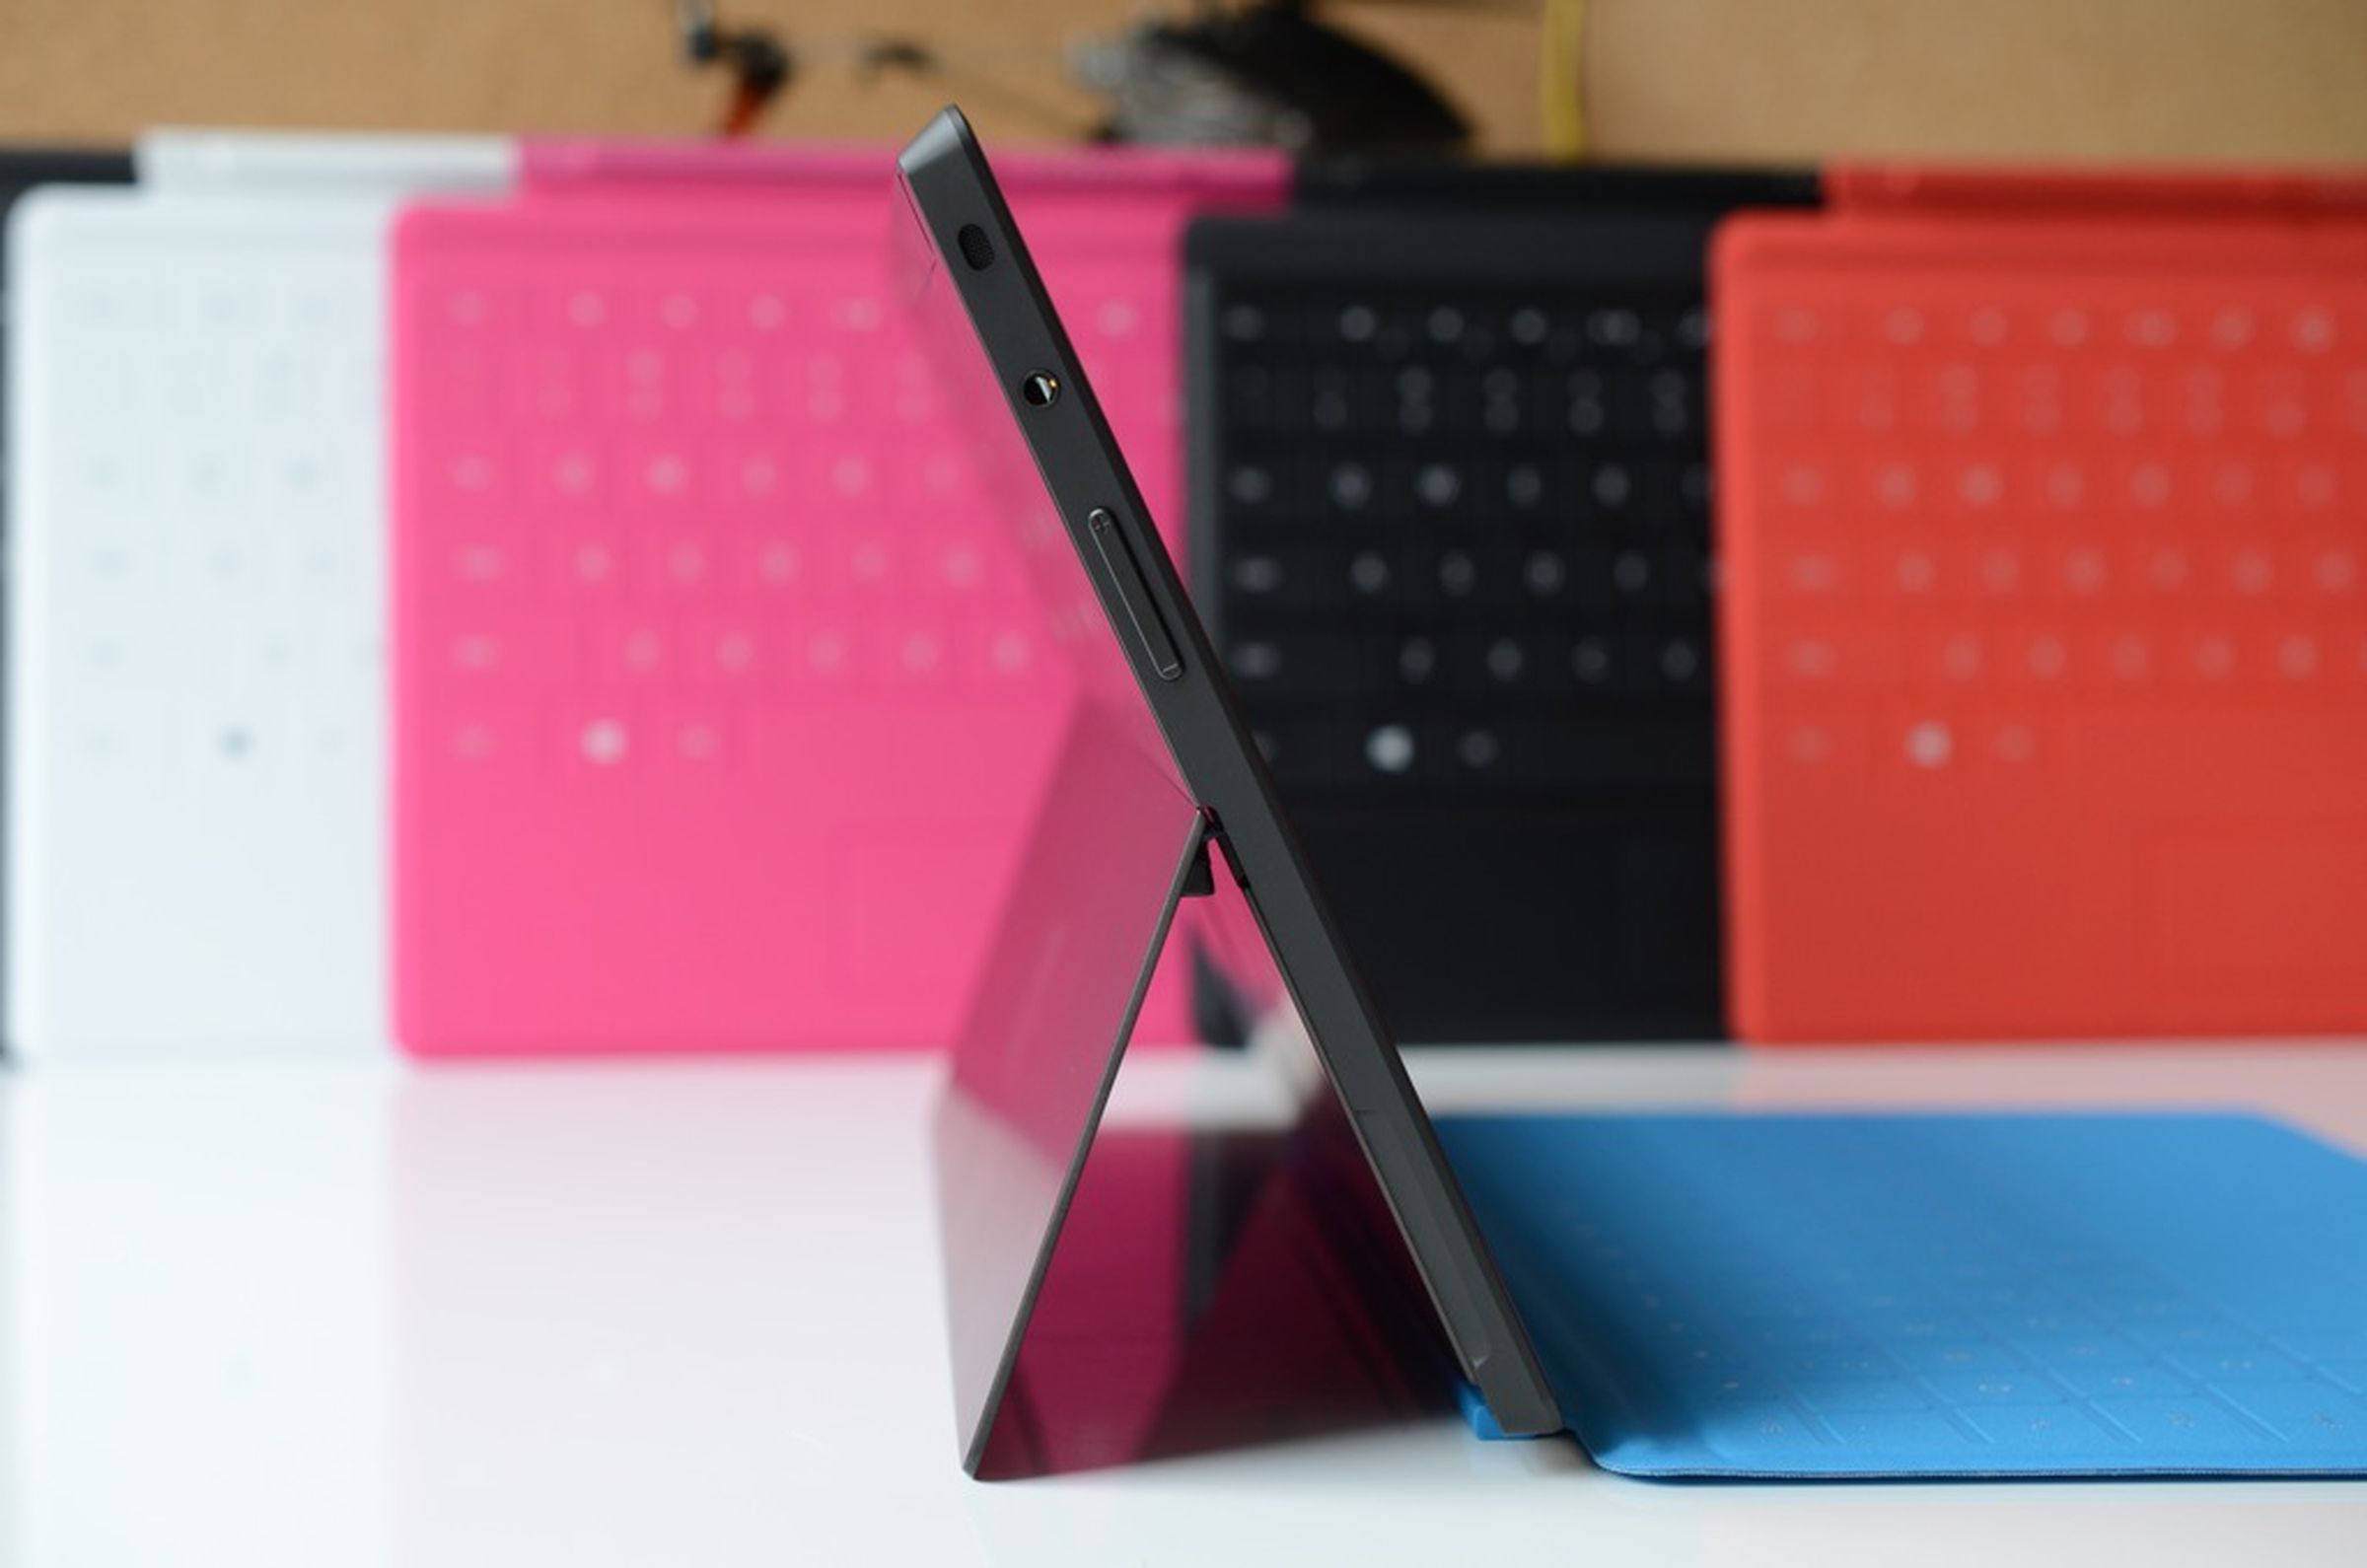 Microsoft Surface RT pictures